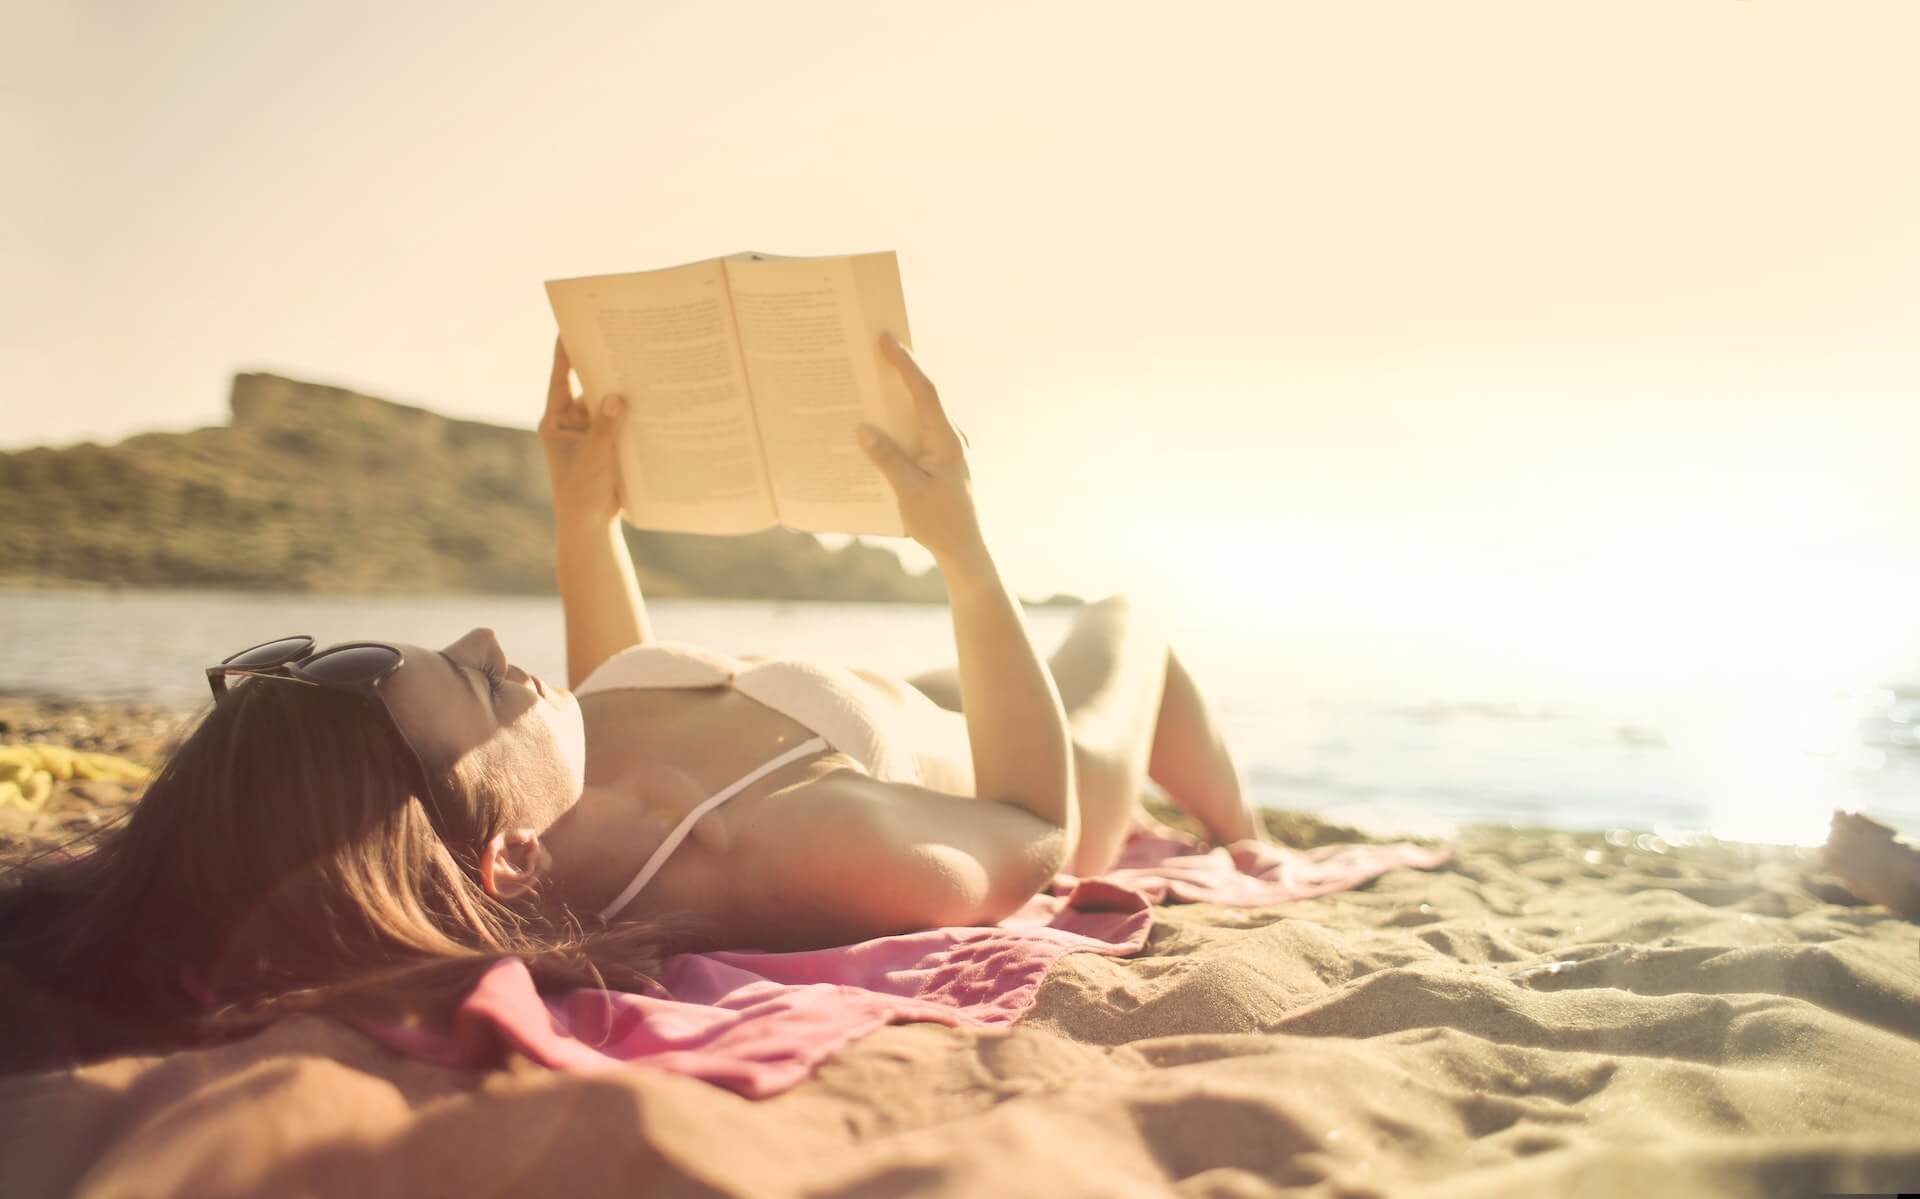 sunbathing while reading a book